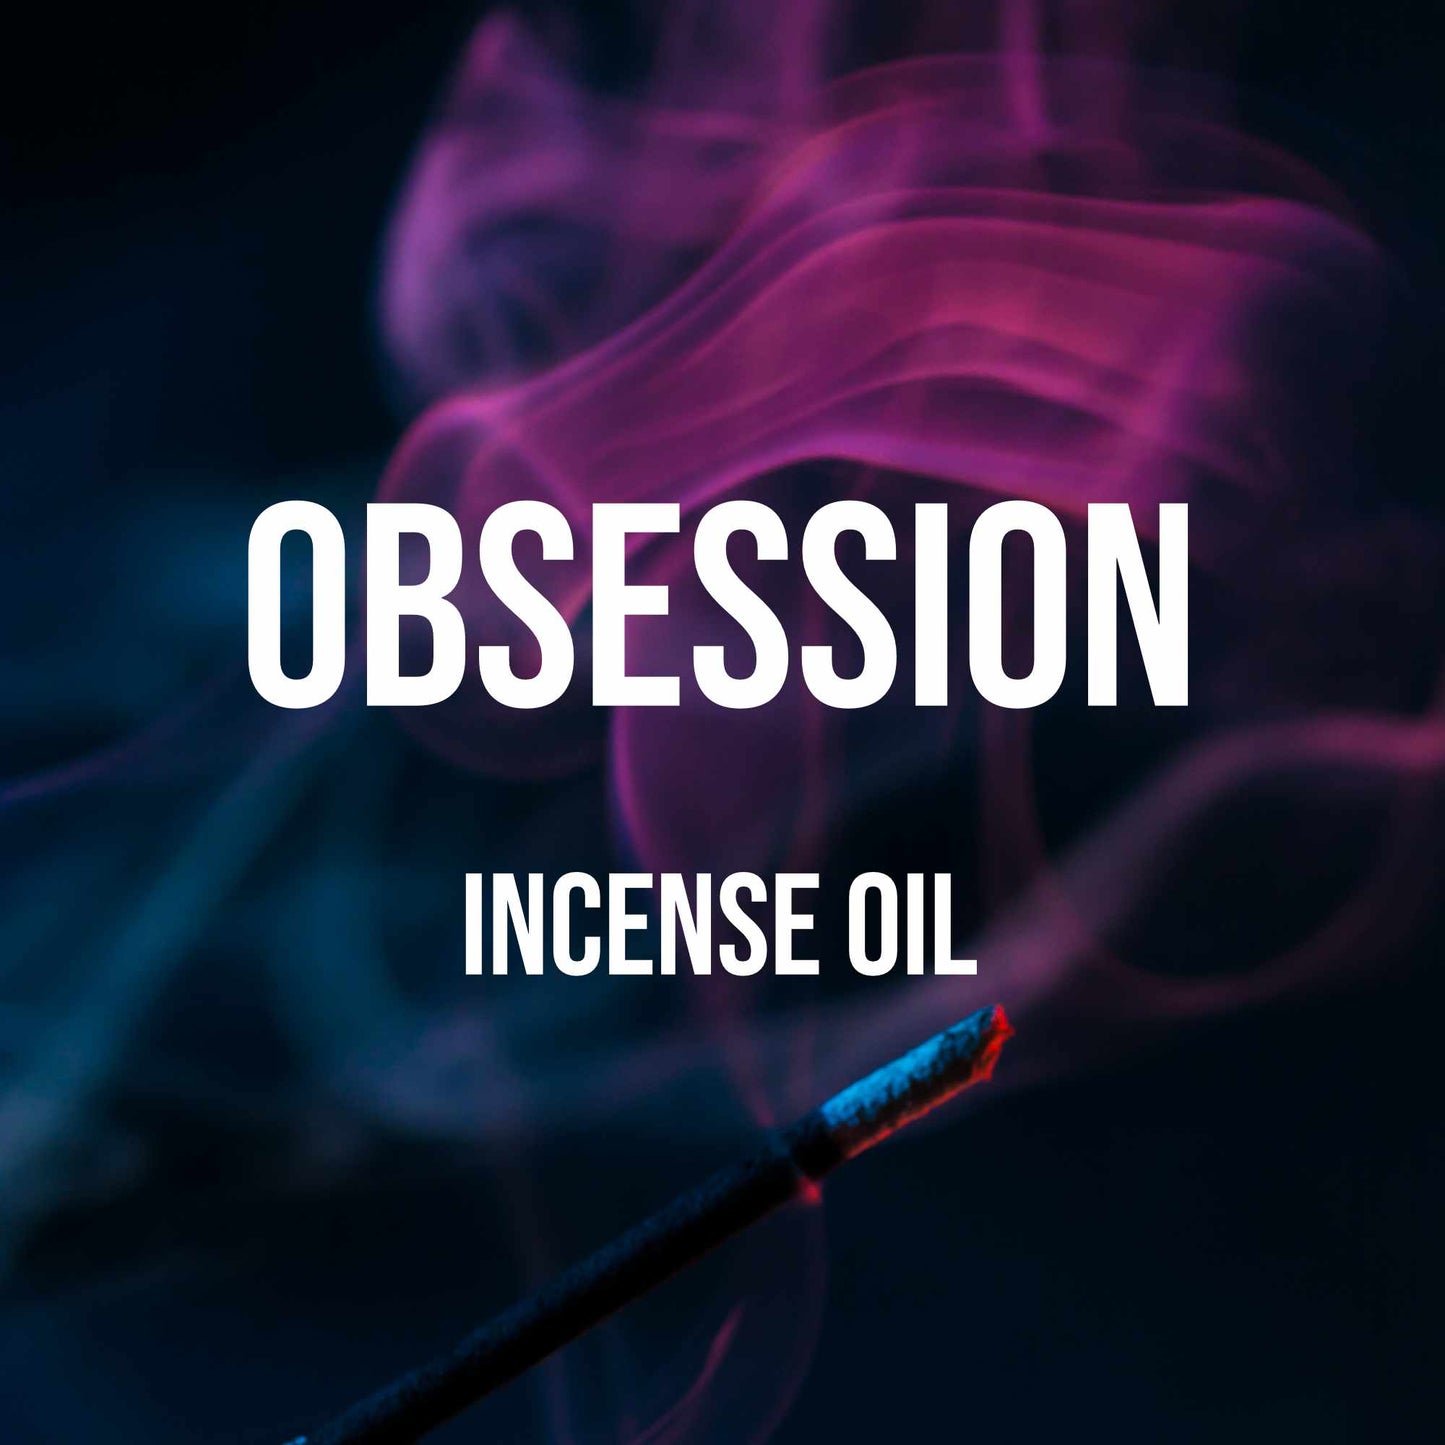 Obsession Incense Oil